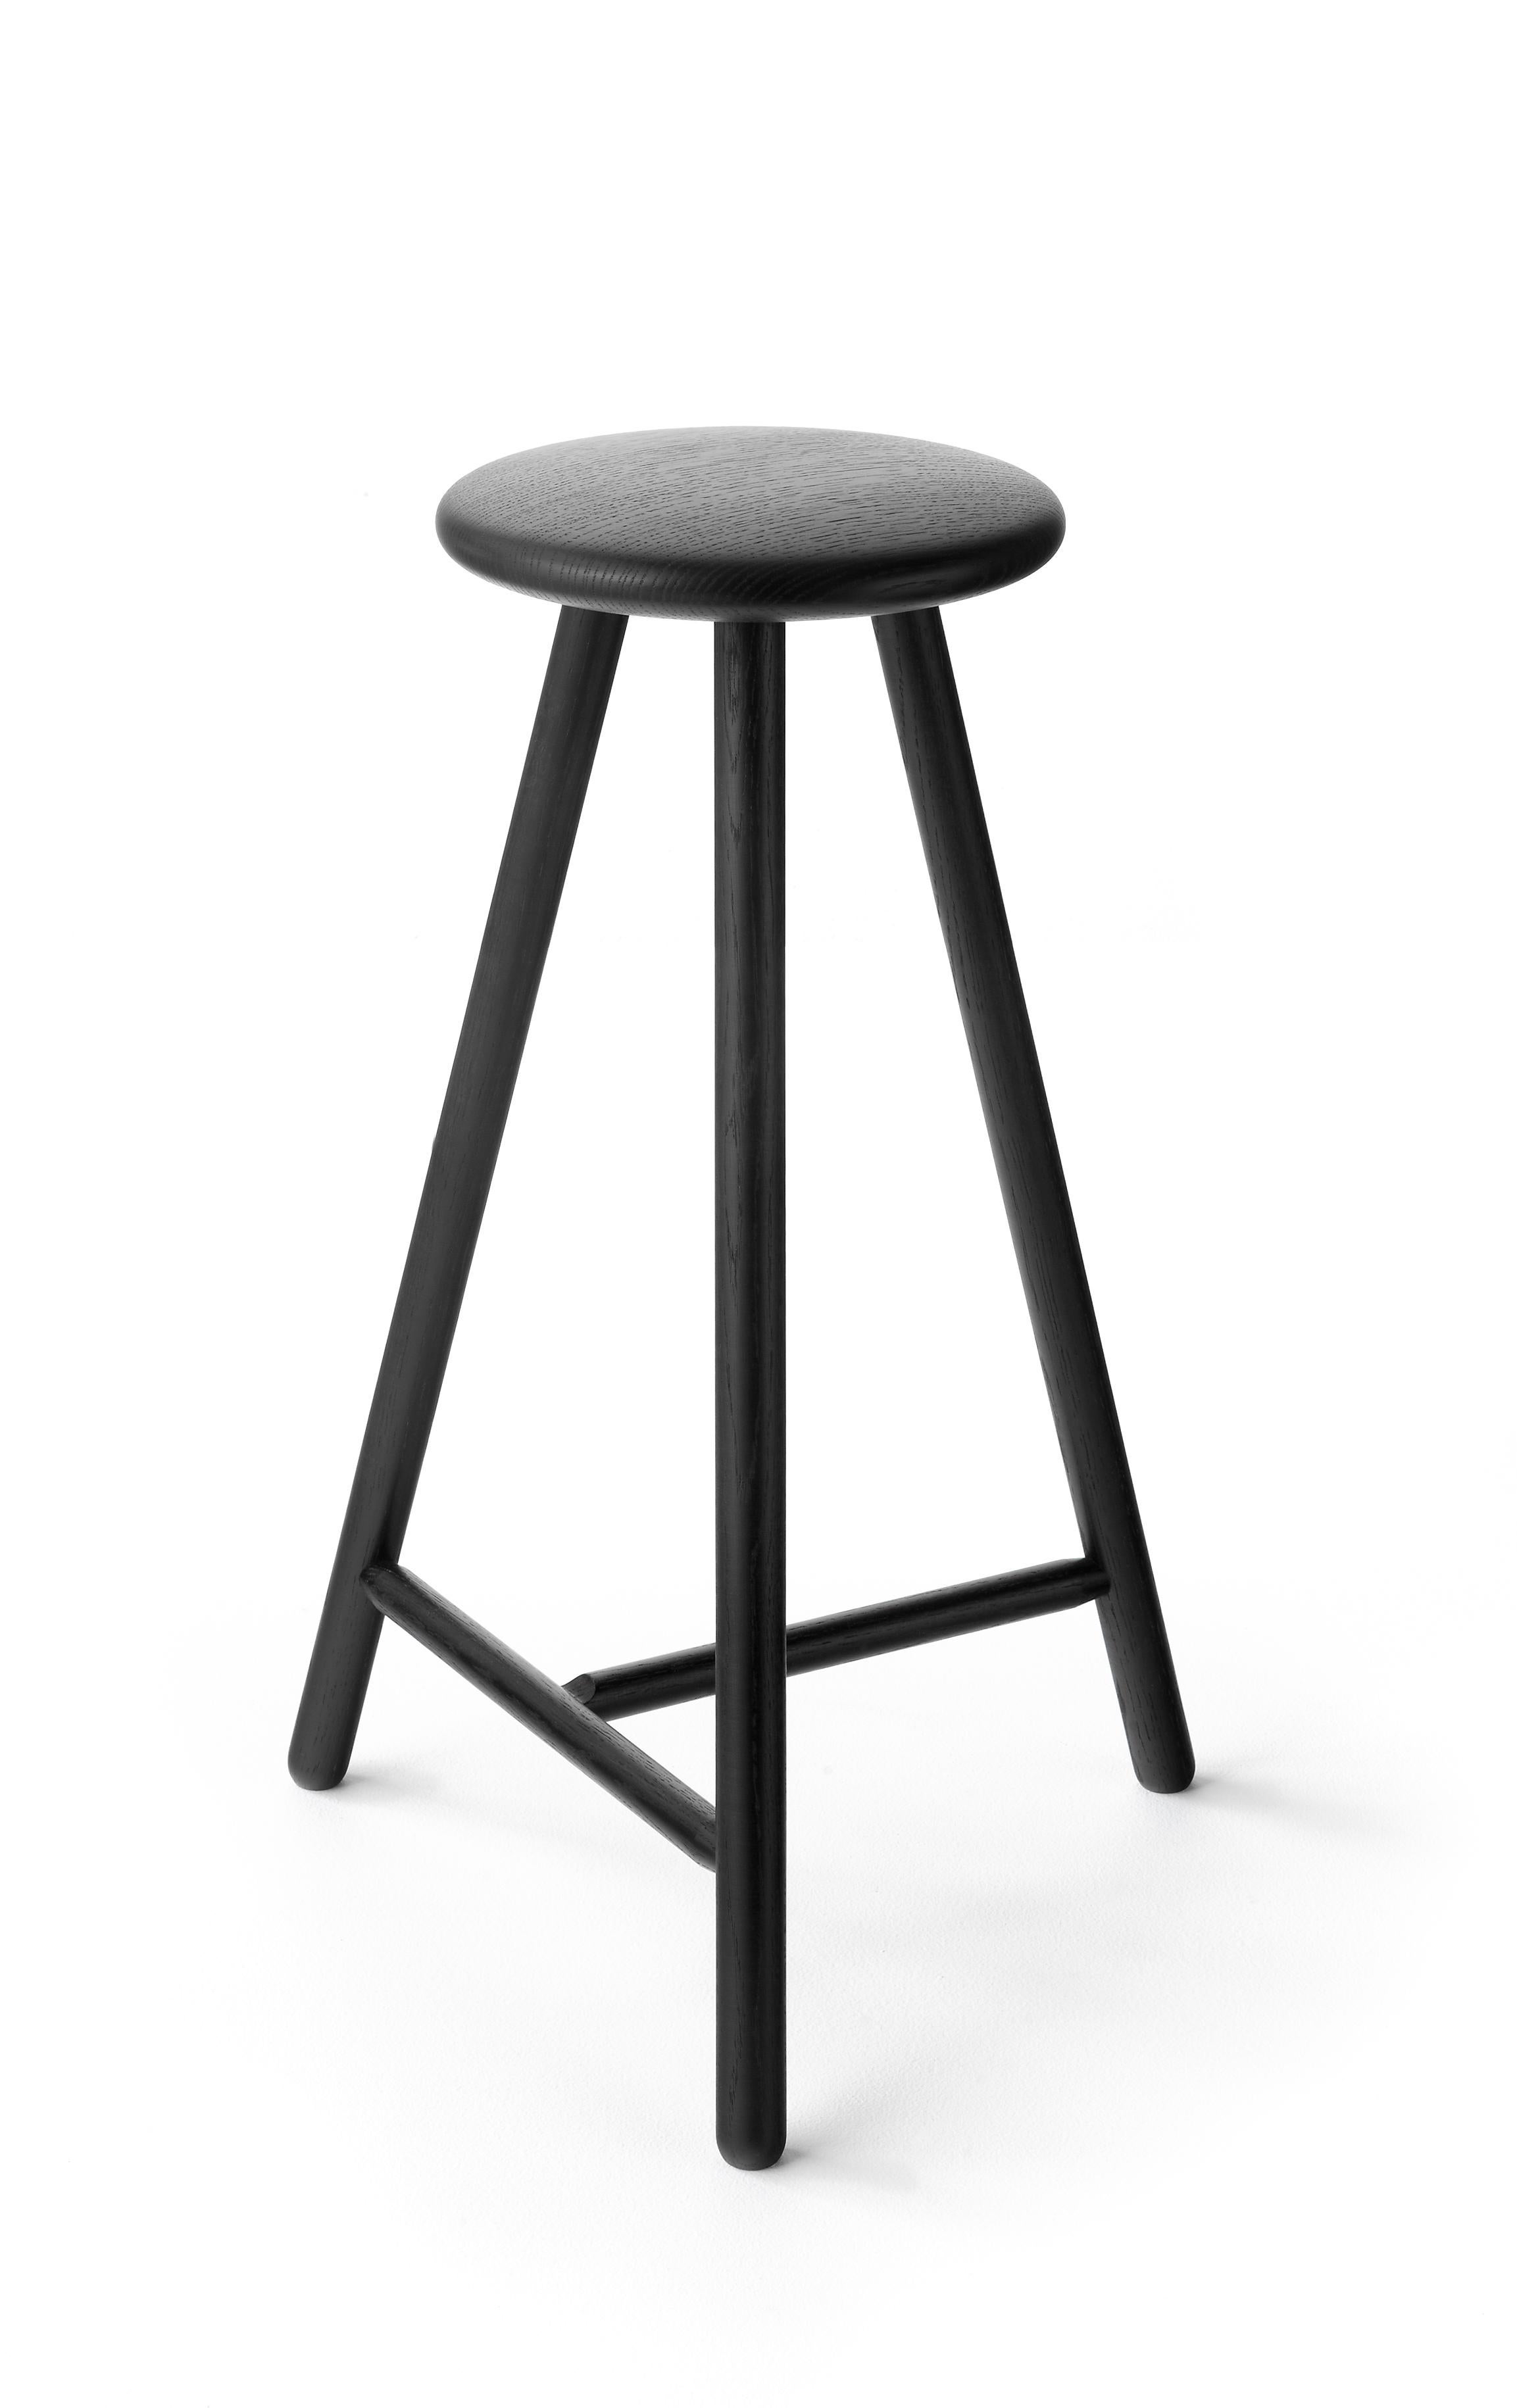 The Perch bar stool got its inspiration from a very round, solid wooden doorknob in Helsinki. The young designers participated in the Finnish Design Shop Design Competition, FDS Awards, and won the first prize with their light